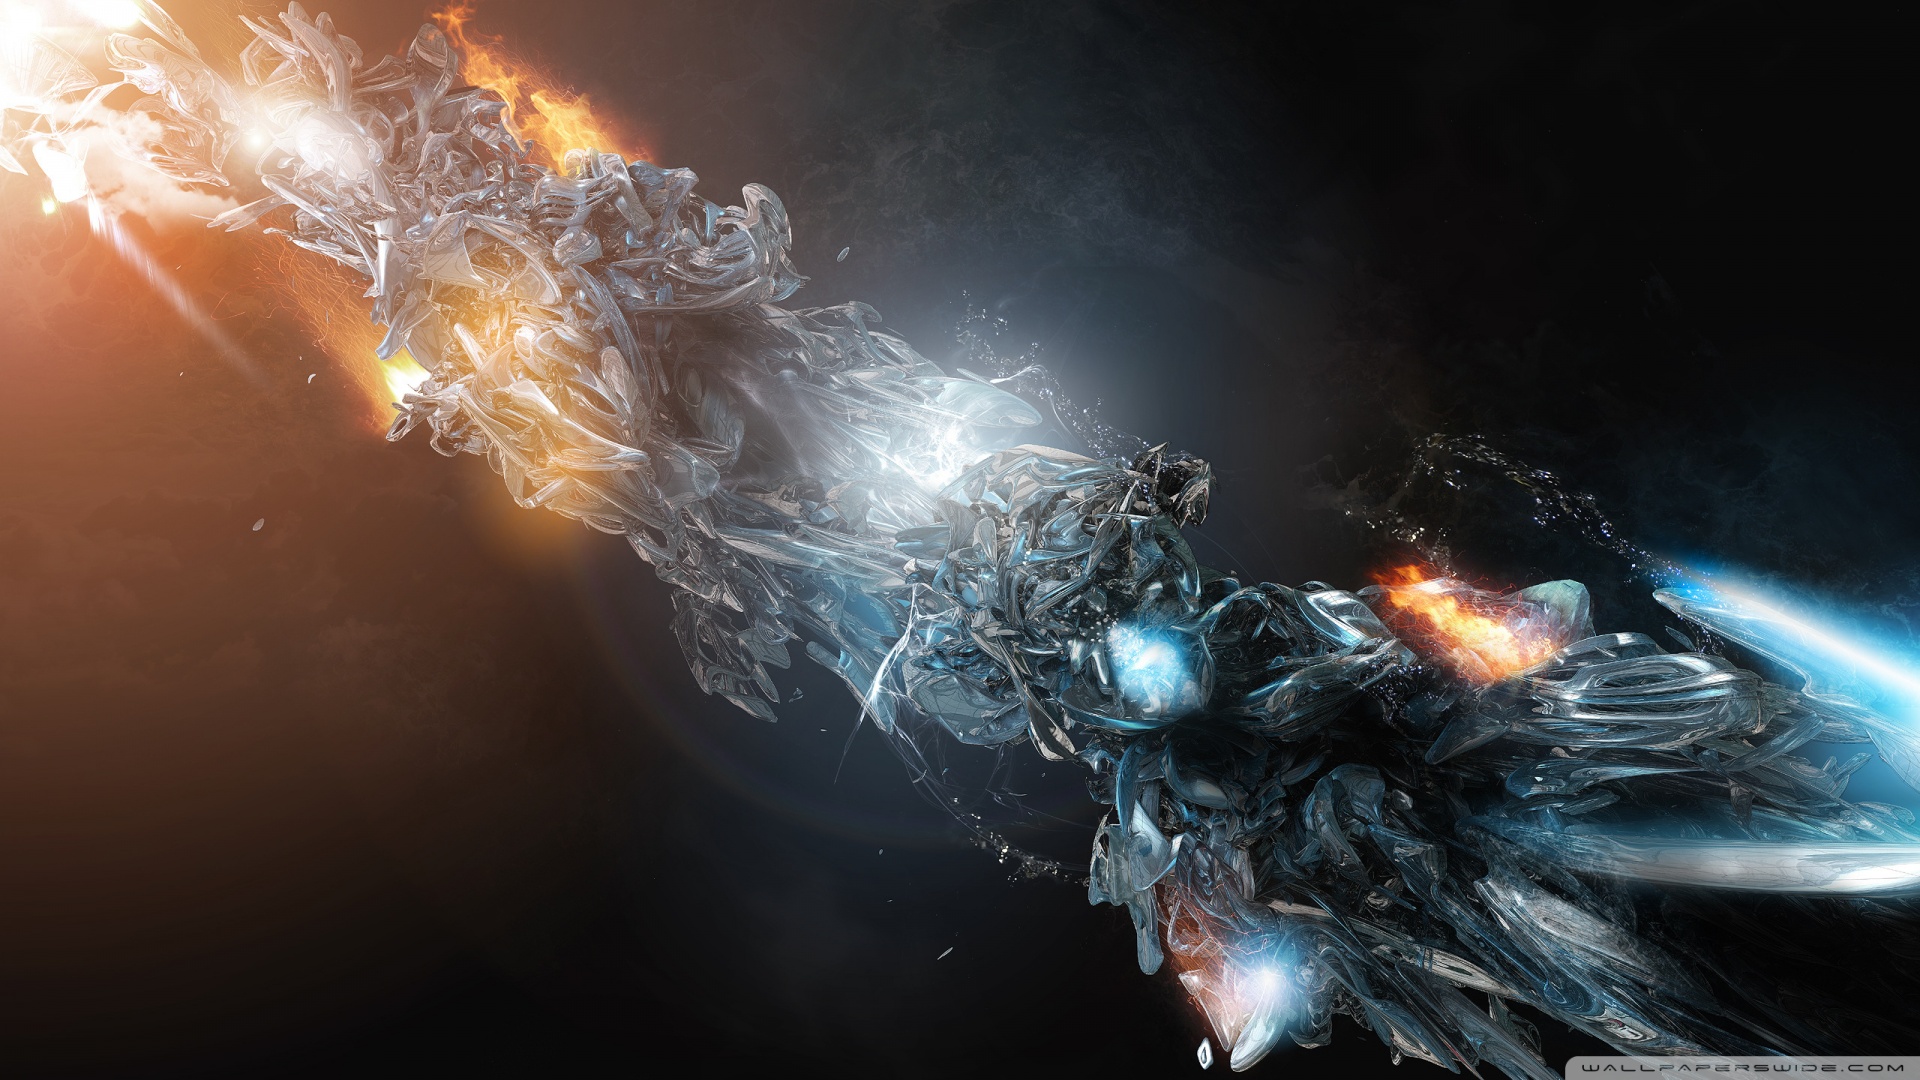 Fire And Ice 4k - 1920x1080 Wallpaper 